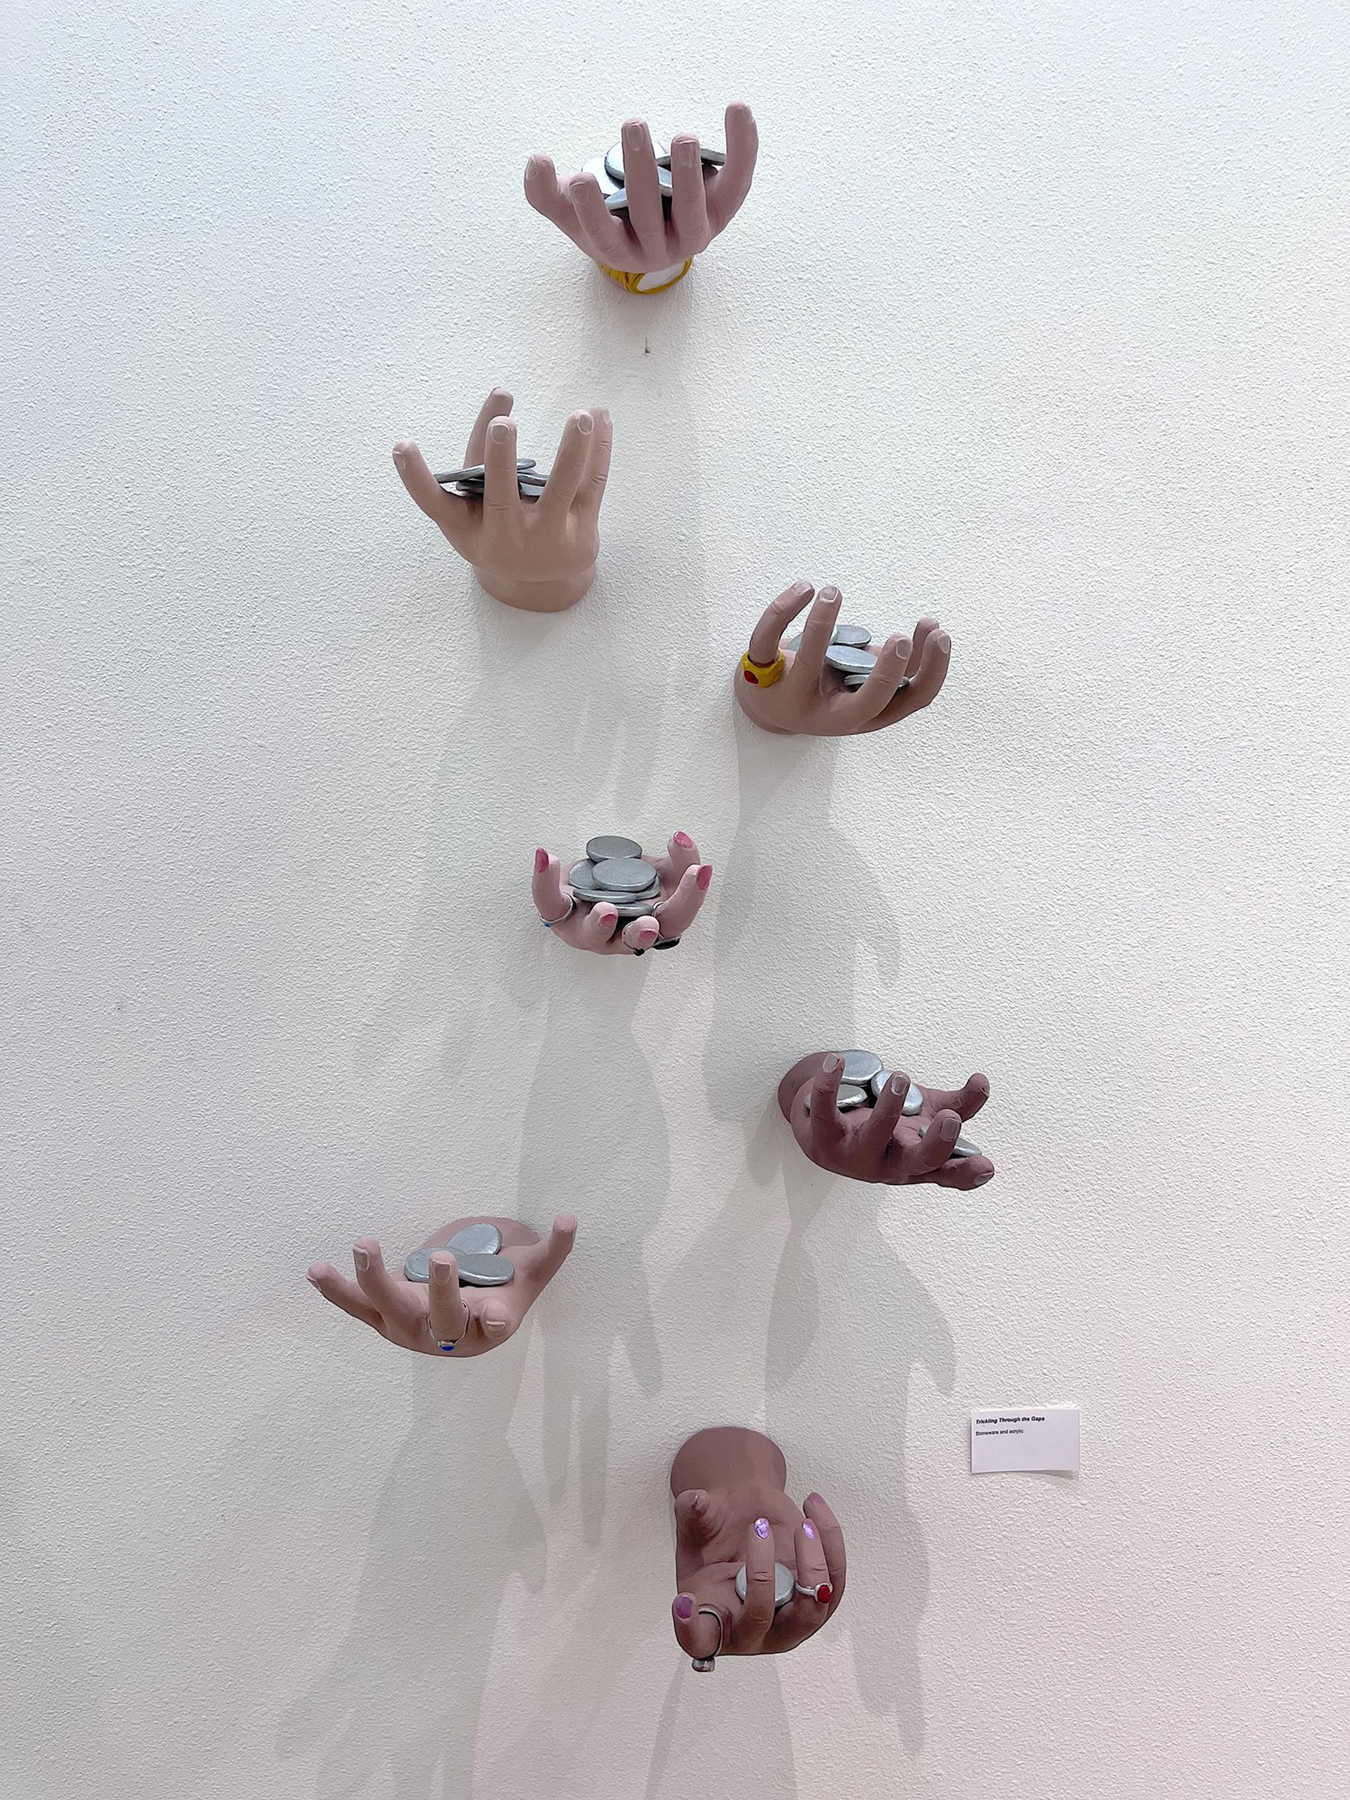 Hands affixed to the wall holding coins, courtesy of the artist